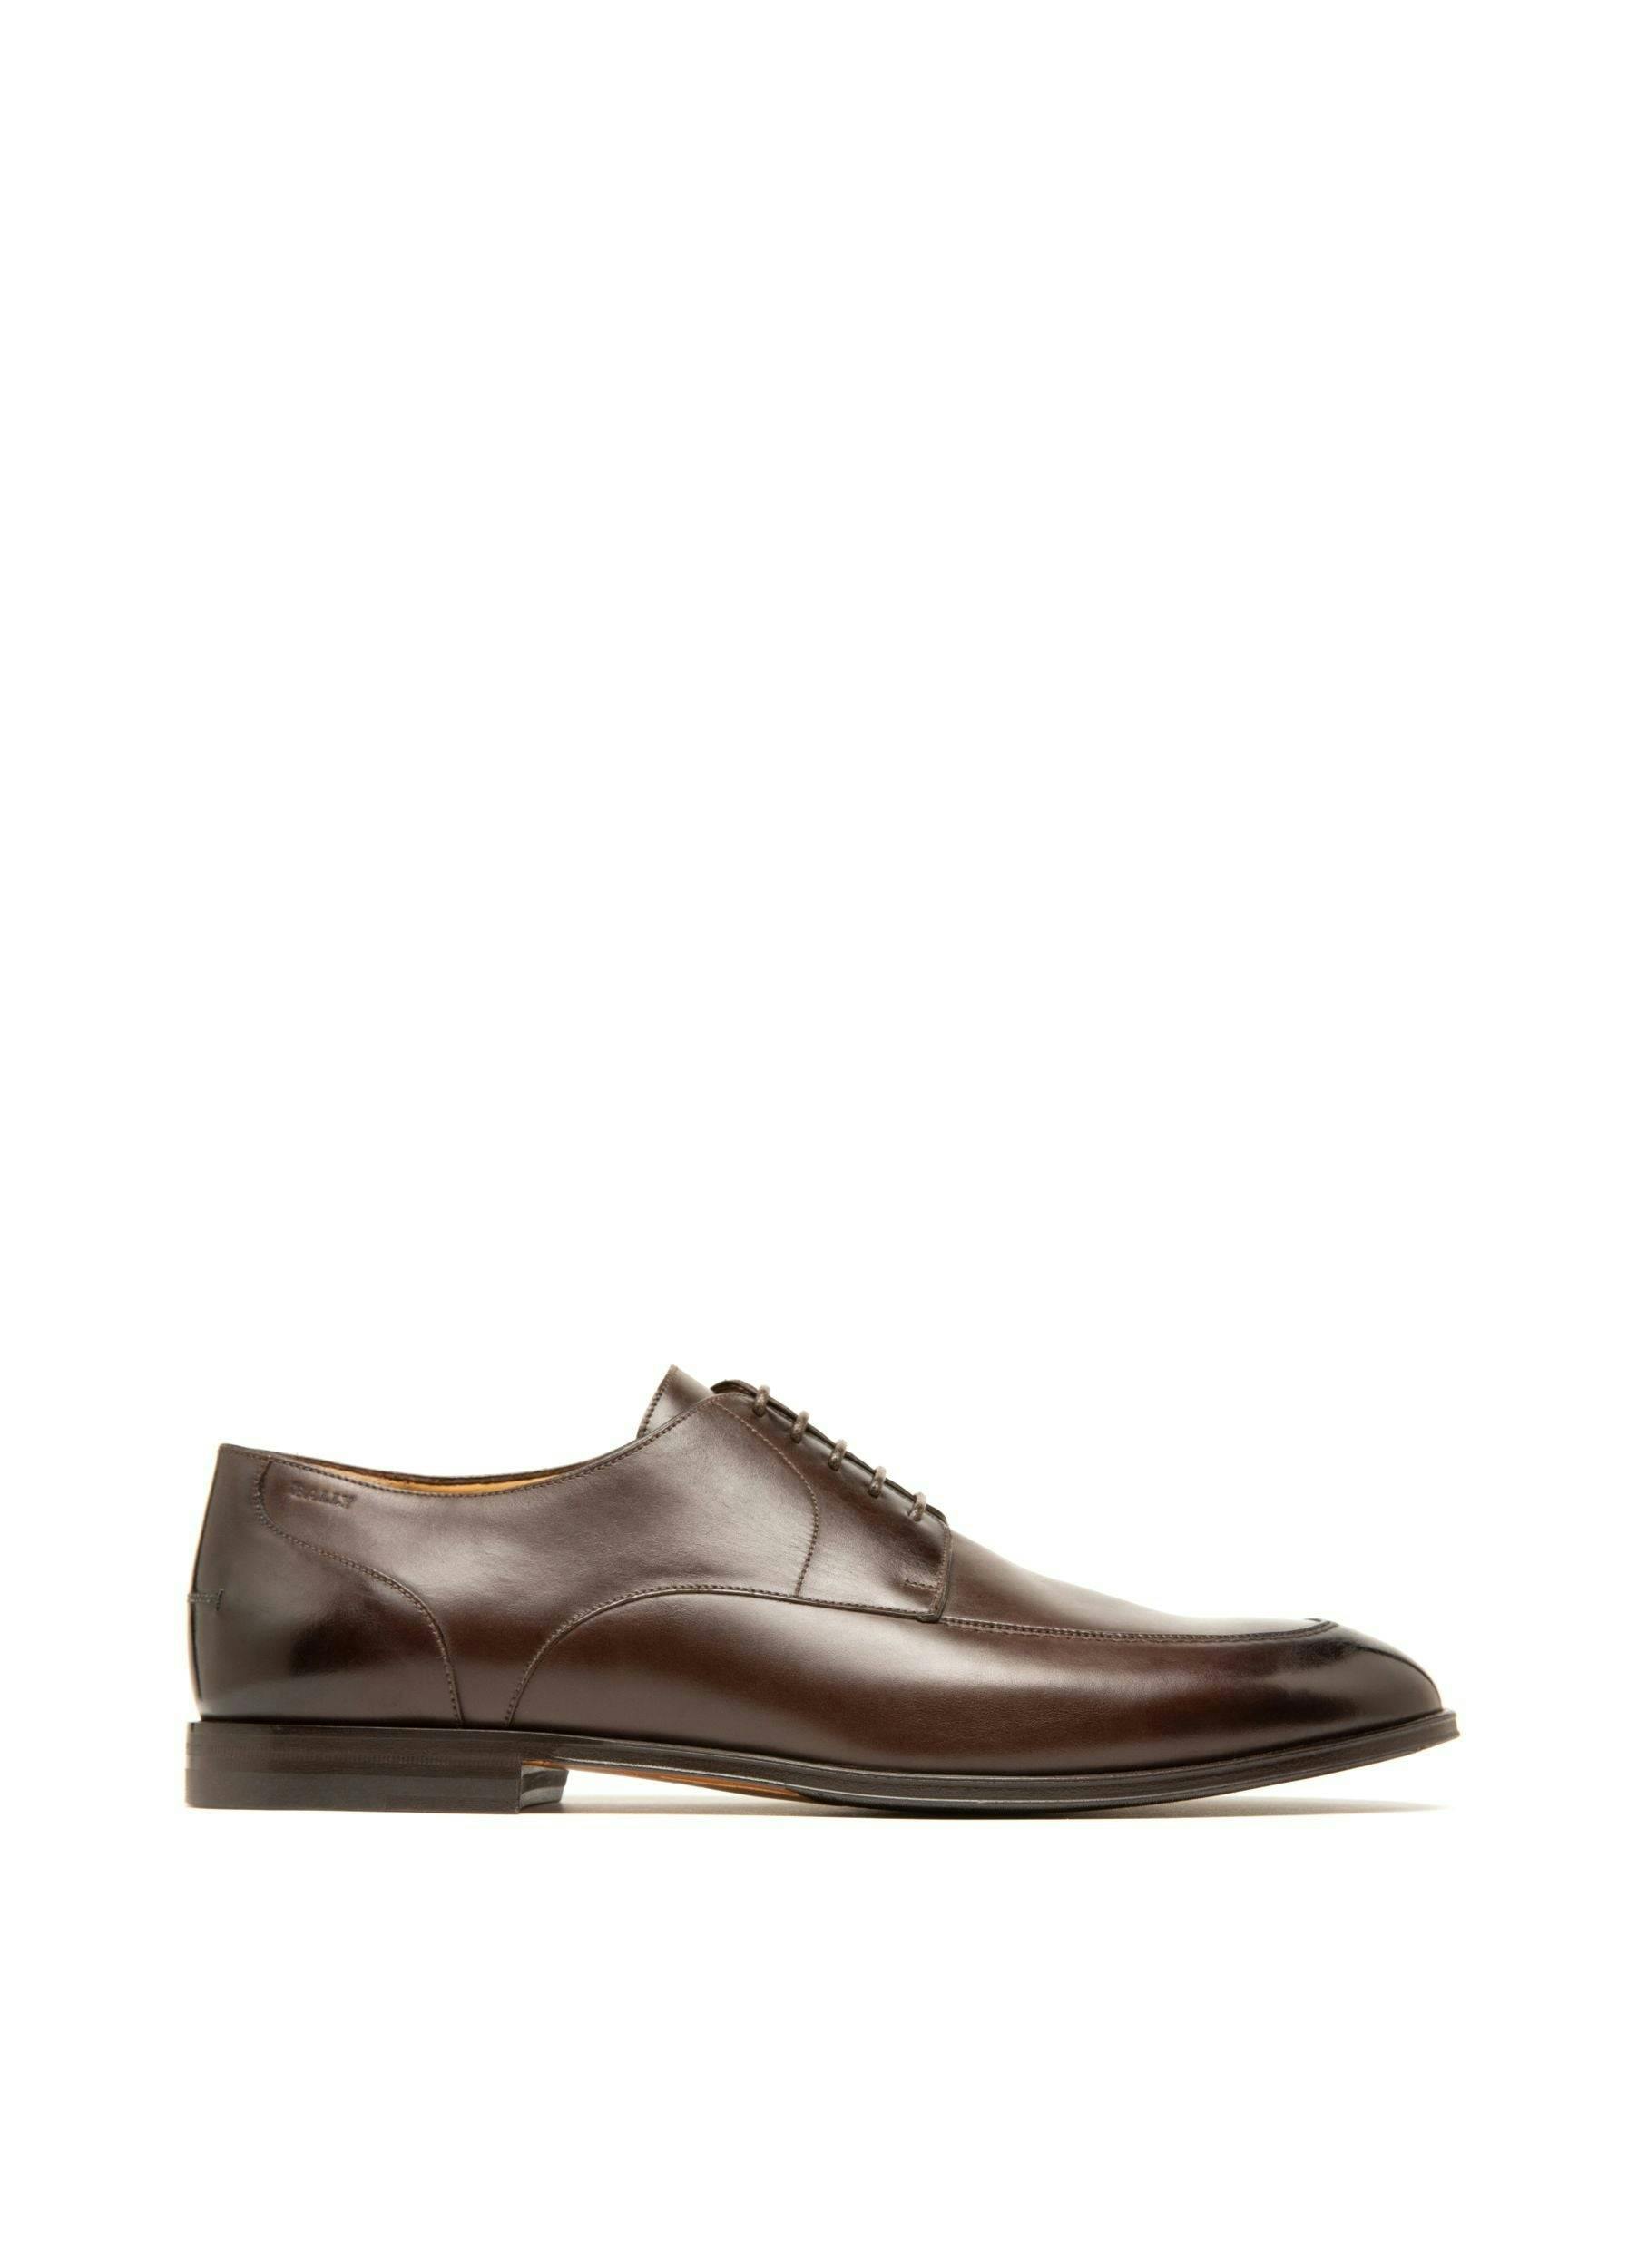 Wedmer Leather Derby Shoes In Brown - Men's - Bally - 01